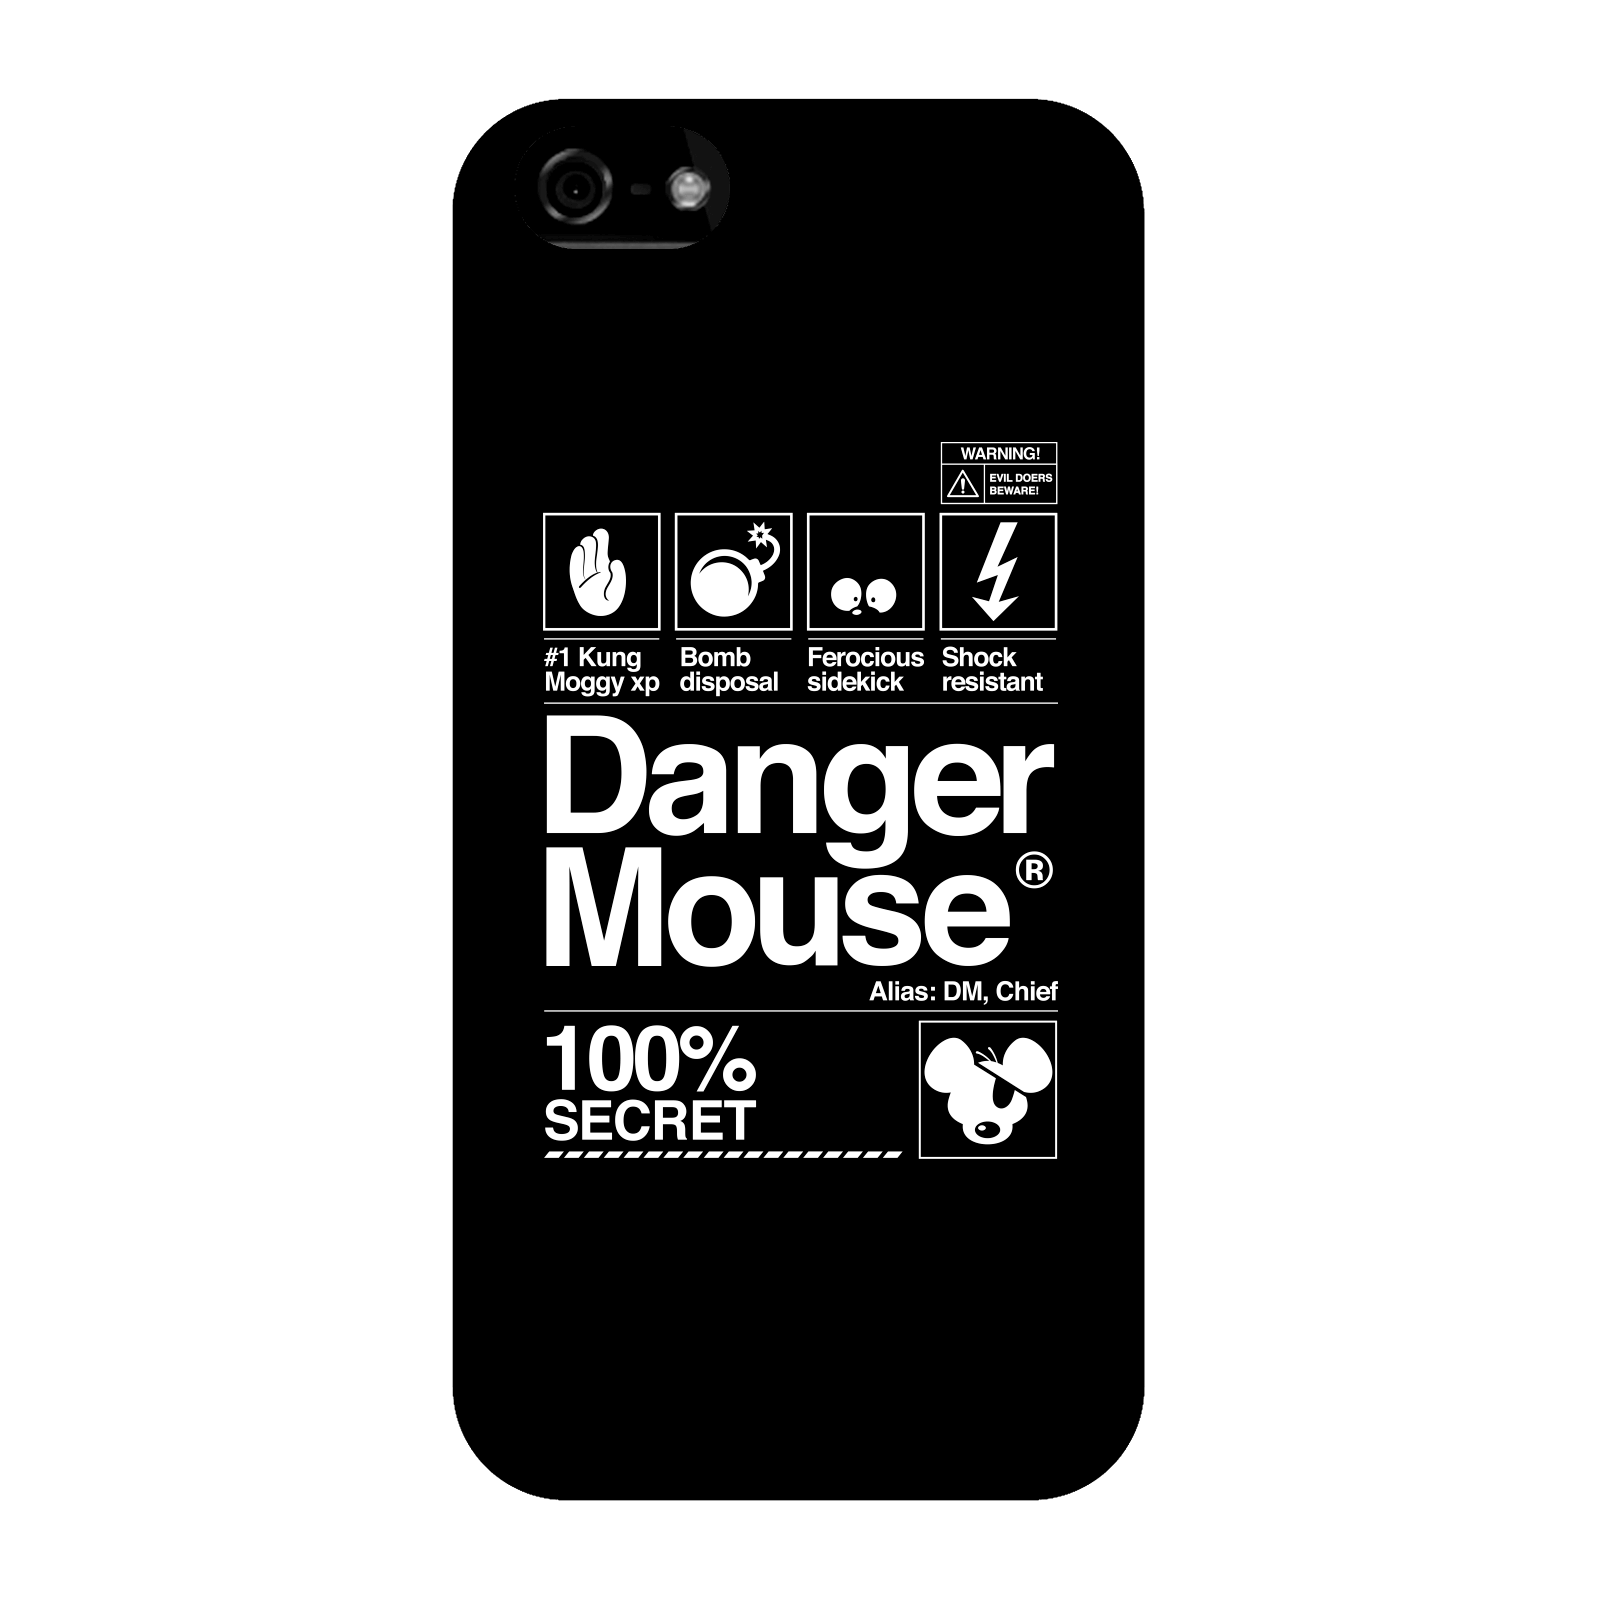 Danger Mouse 100% Secret Phone Case for iPhone and Android - iPhone 5C - Snap Case - Matte